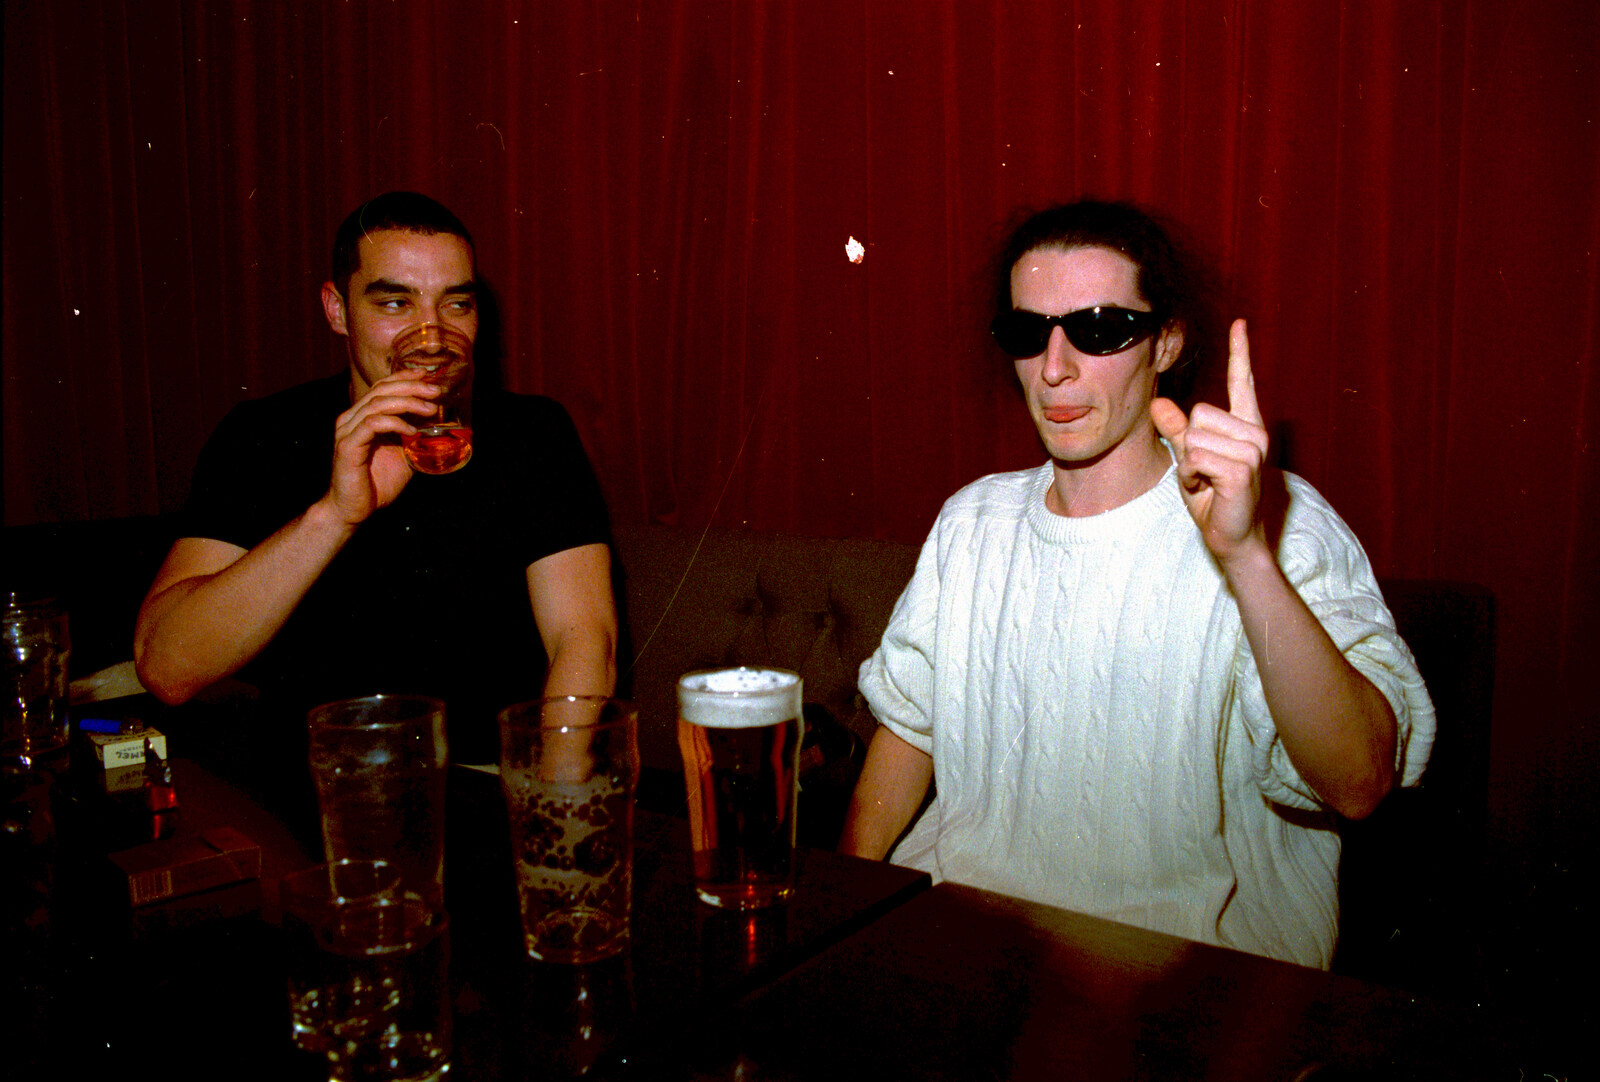 CISU Plays Cardinal's Hat in the SCC Social Club, Ipswich, Suffolk - 3rd August 1997: The French dude sticks a finger up